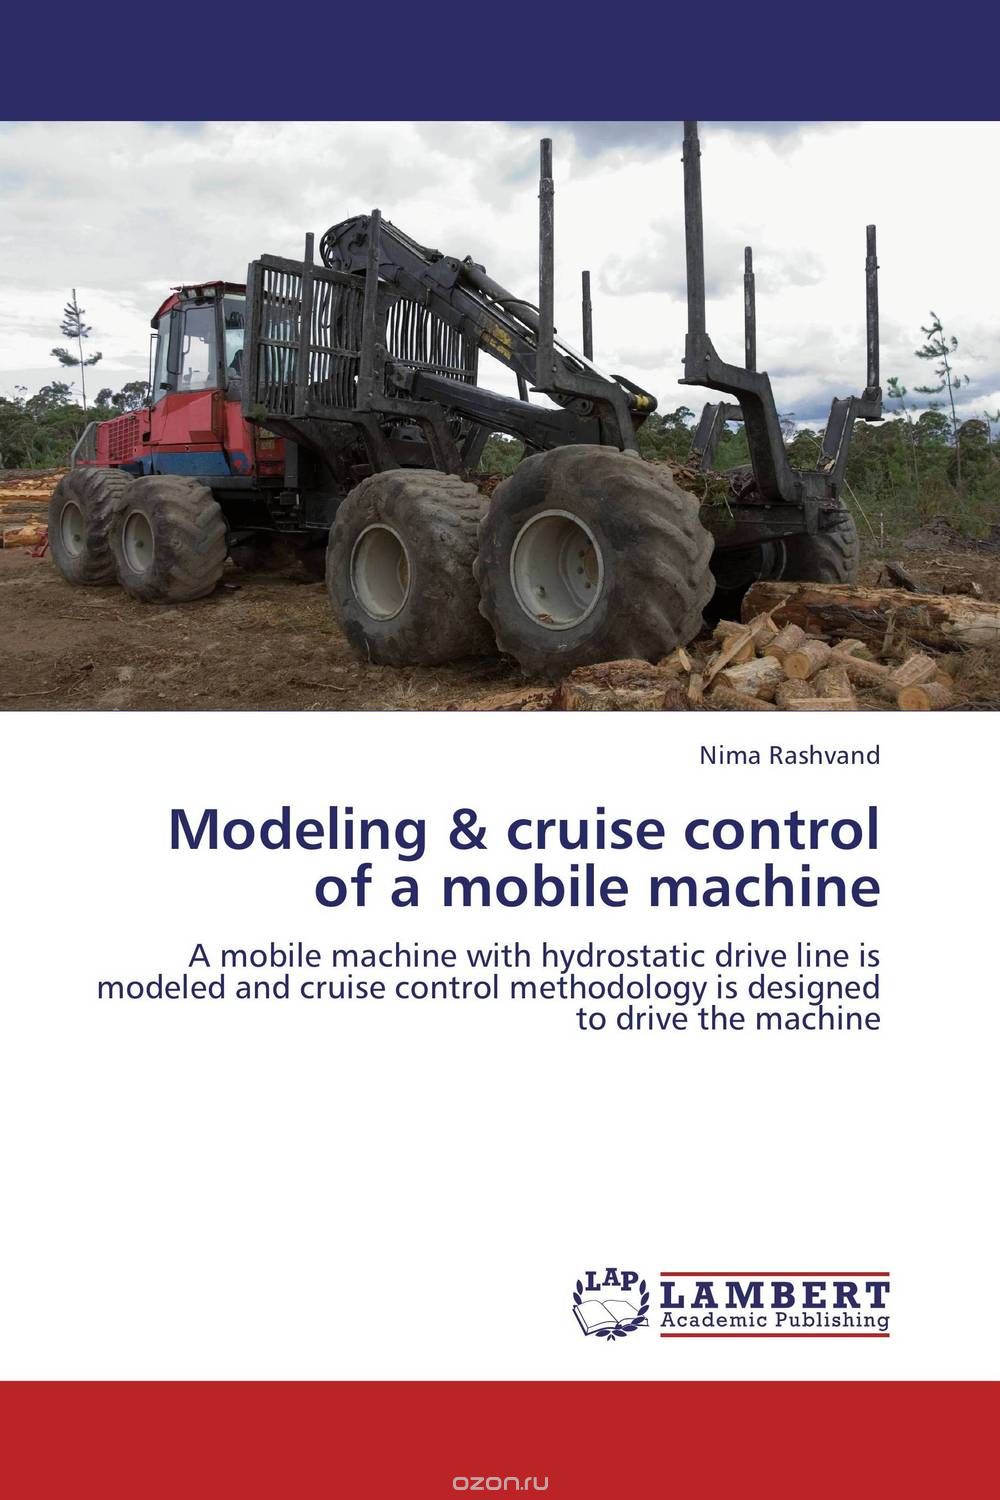 Modeling & cruise control of a mobile machine